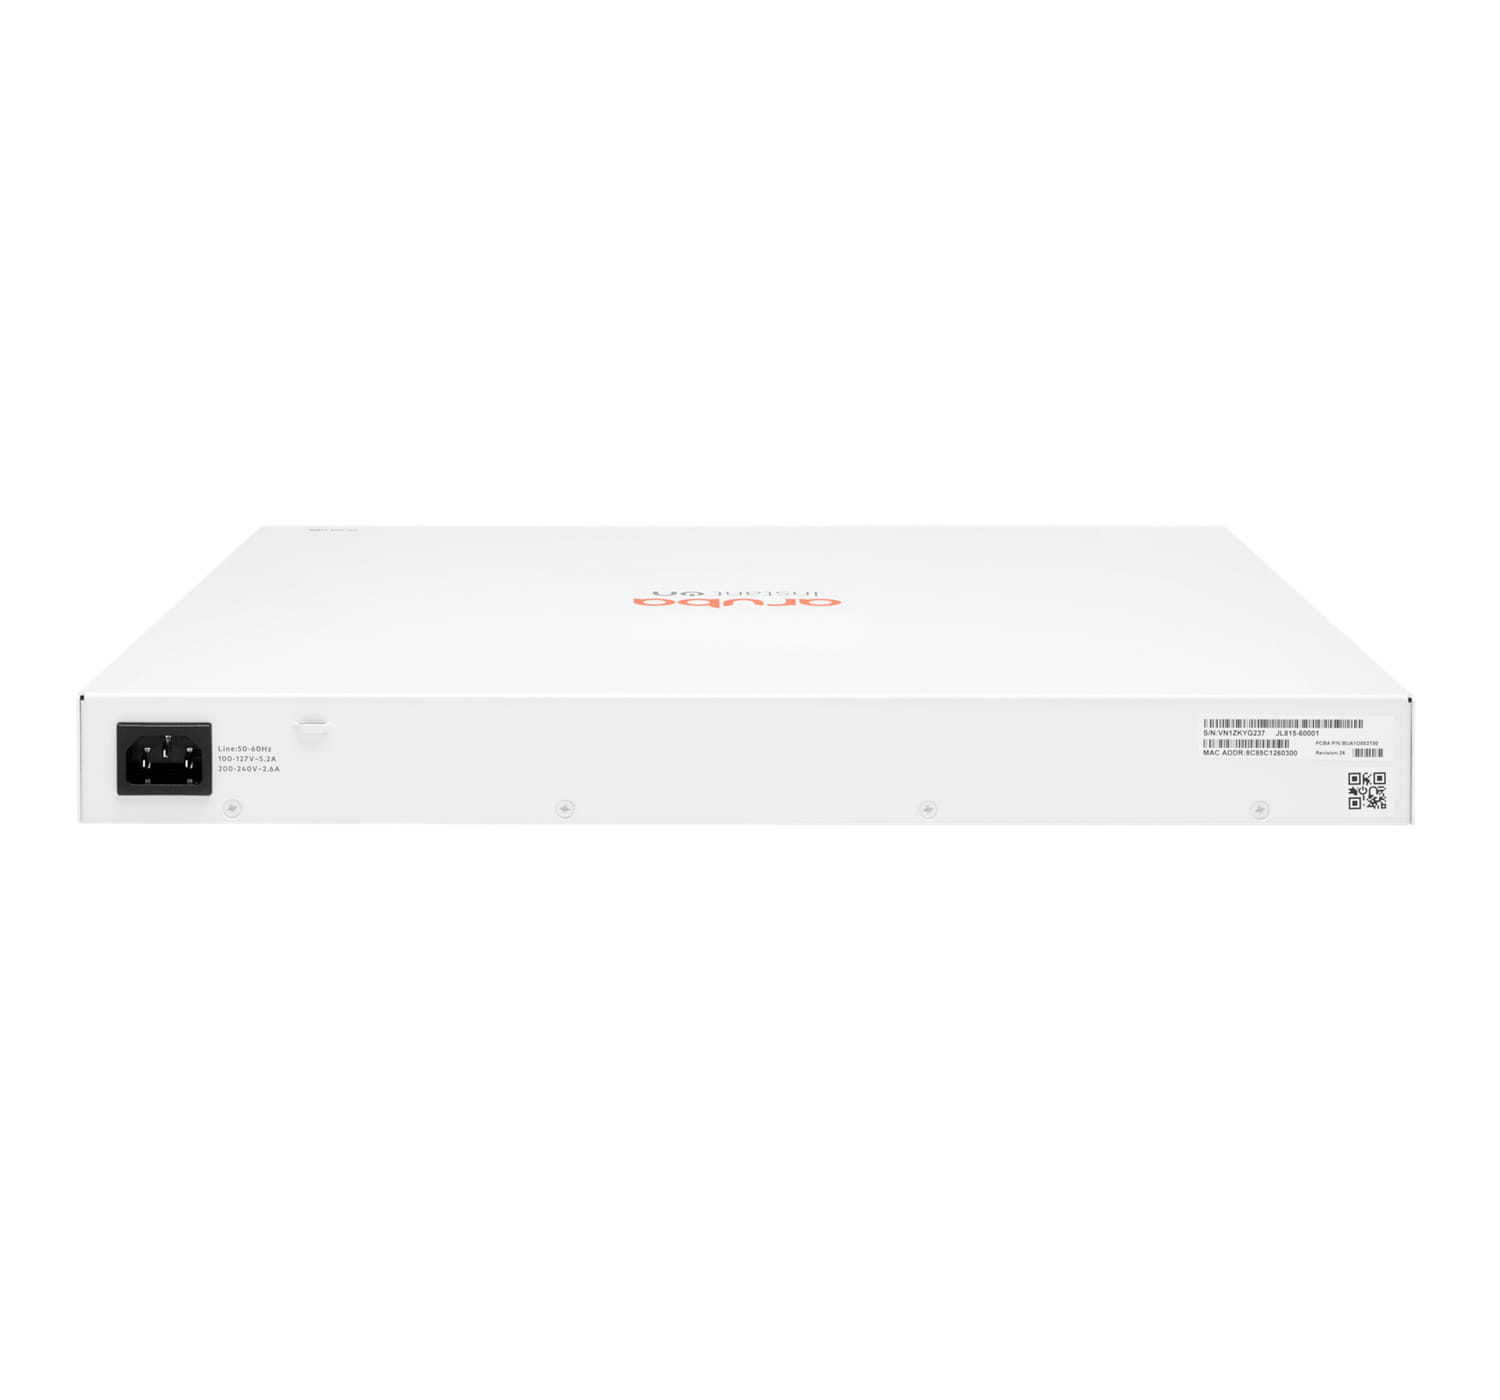 HPE Networking Instant On 1830 48G 24p Class4 PoE 4SFP 370W Switch - Switch - Smart - 24 x 10/100/1000 + 24 x 10/100/1000 (PoE+) - managed